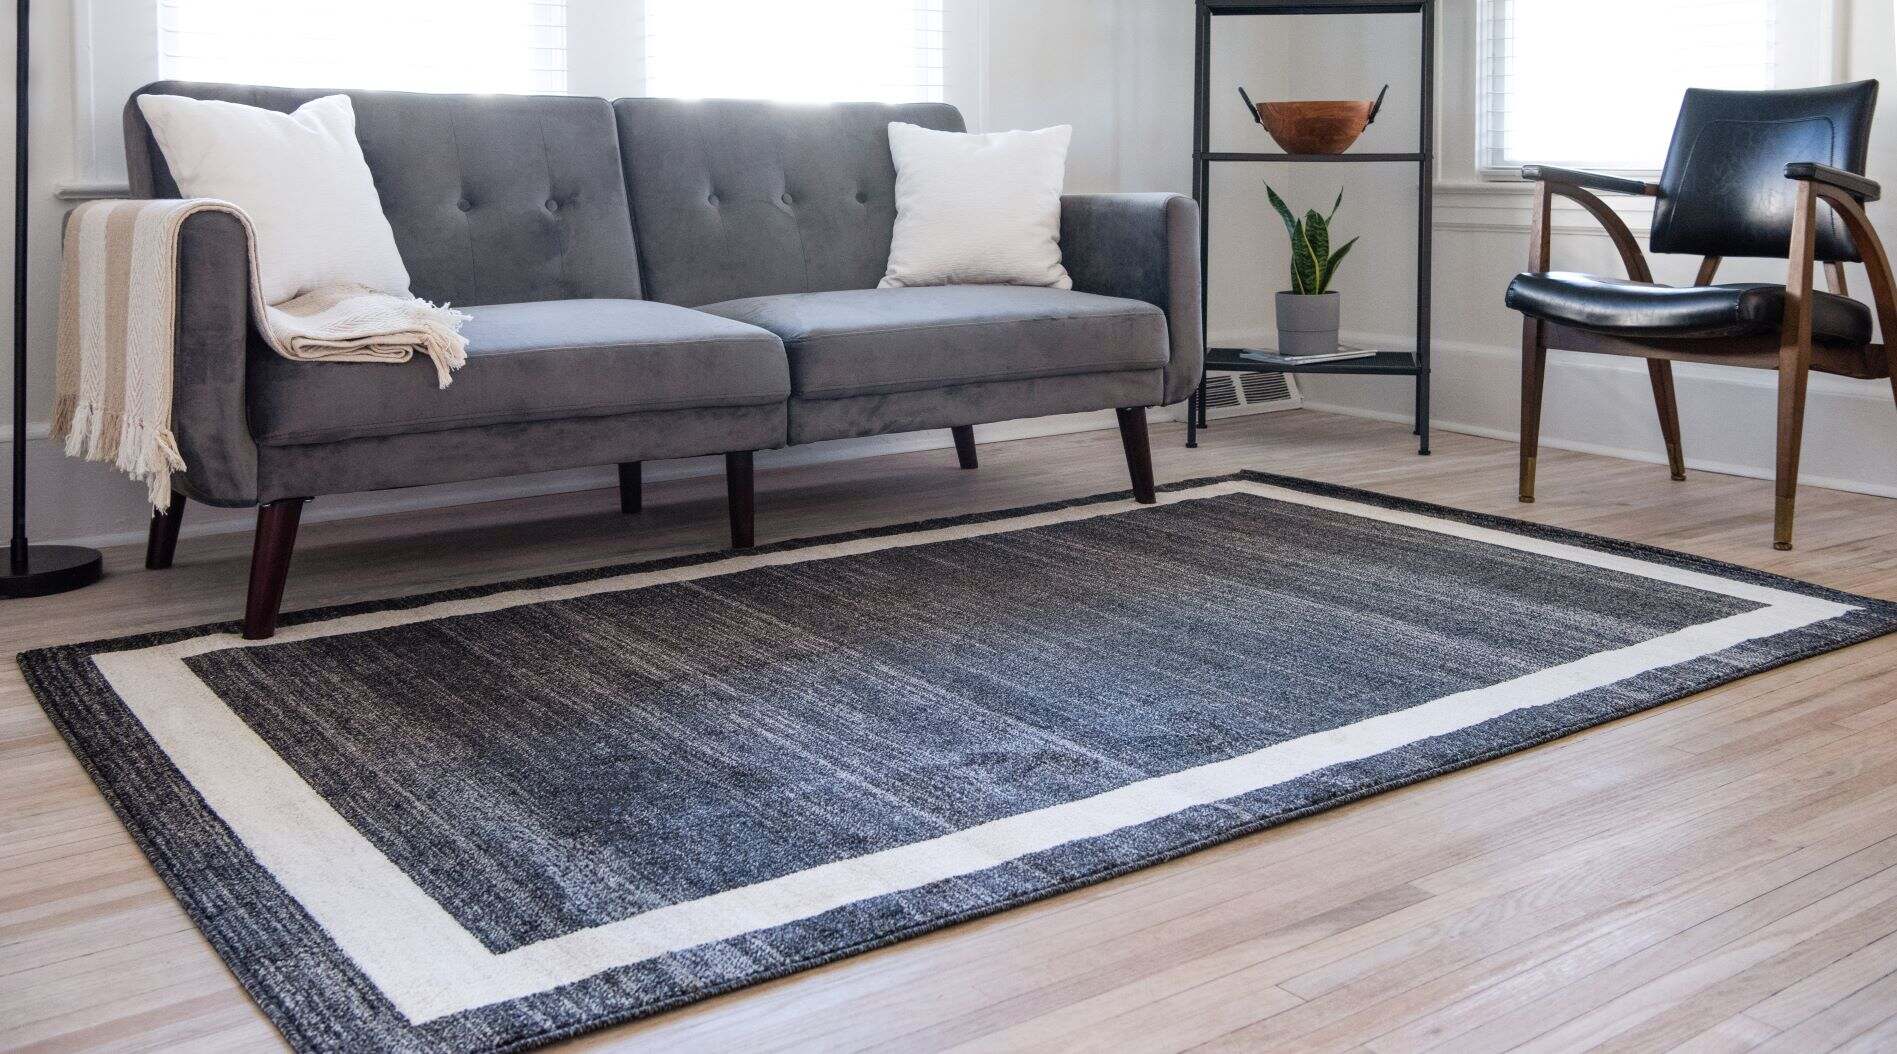 What Pile Rug Is Best For A Living Room